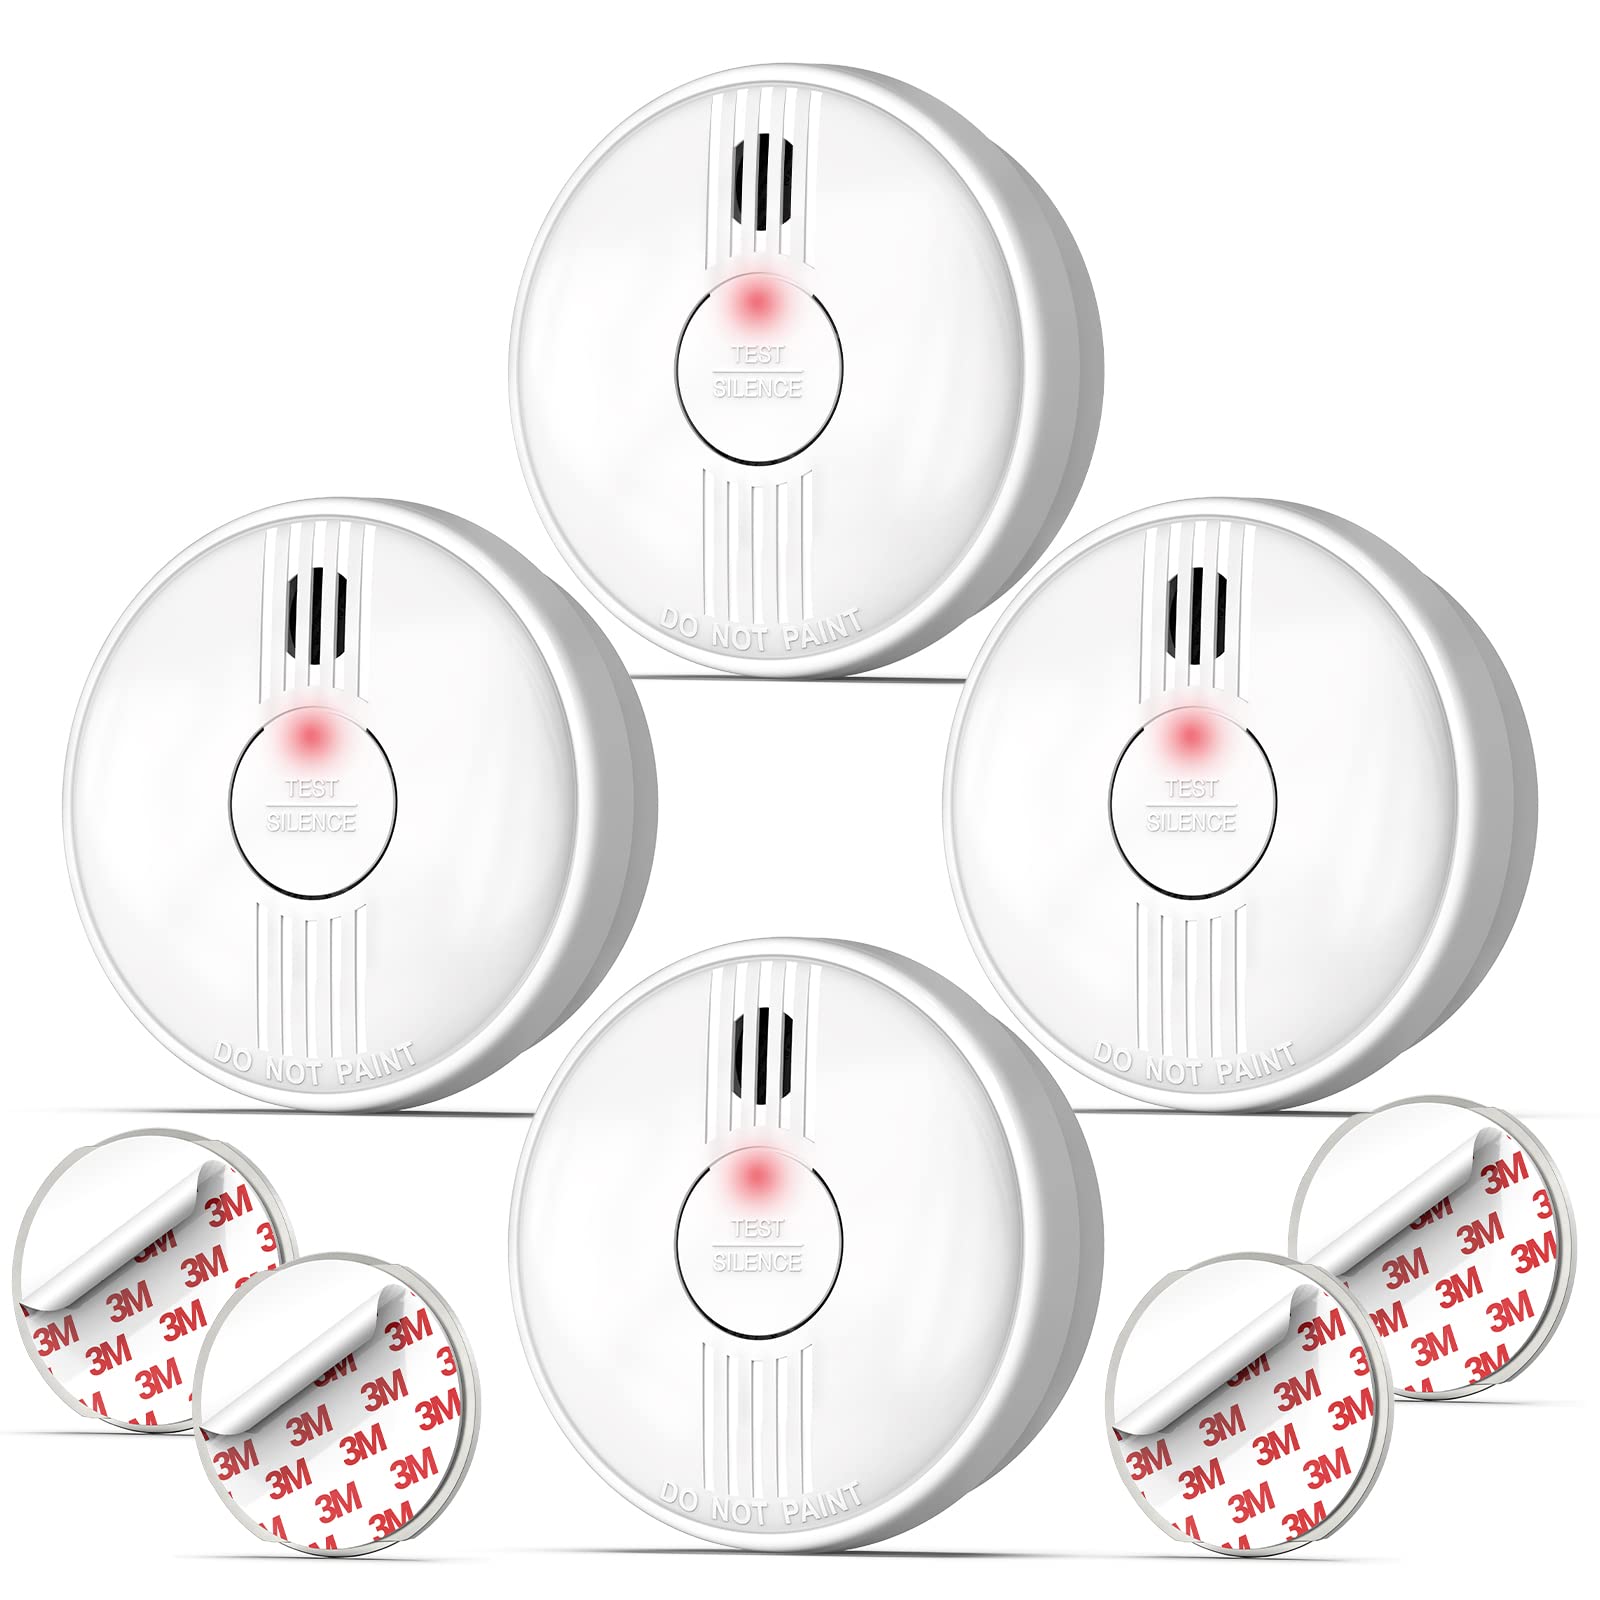 Smoke Detector, GuardryShely Fire Alarms Smoke Detectors with Photoelectric Sensor, Smoke Detector Battery Included with Silence Function and Low Battery Signal, Fire Alarm GW206C for Home, 4 Packs